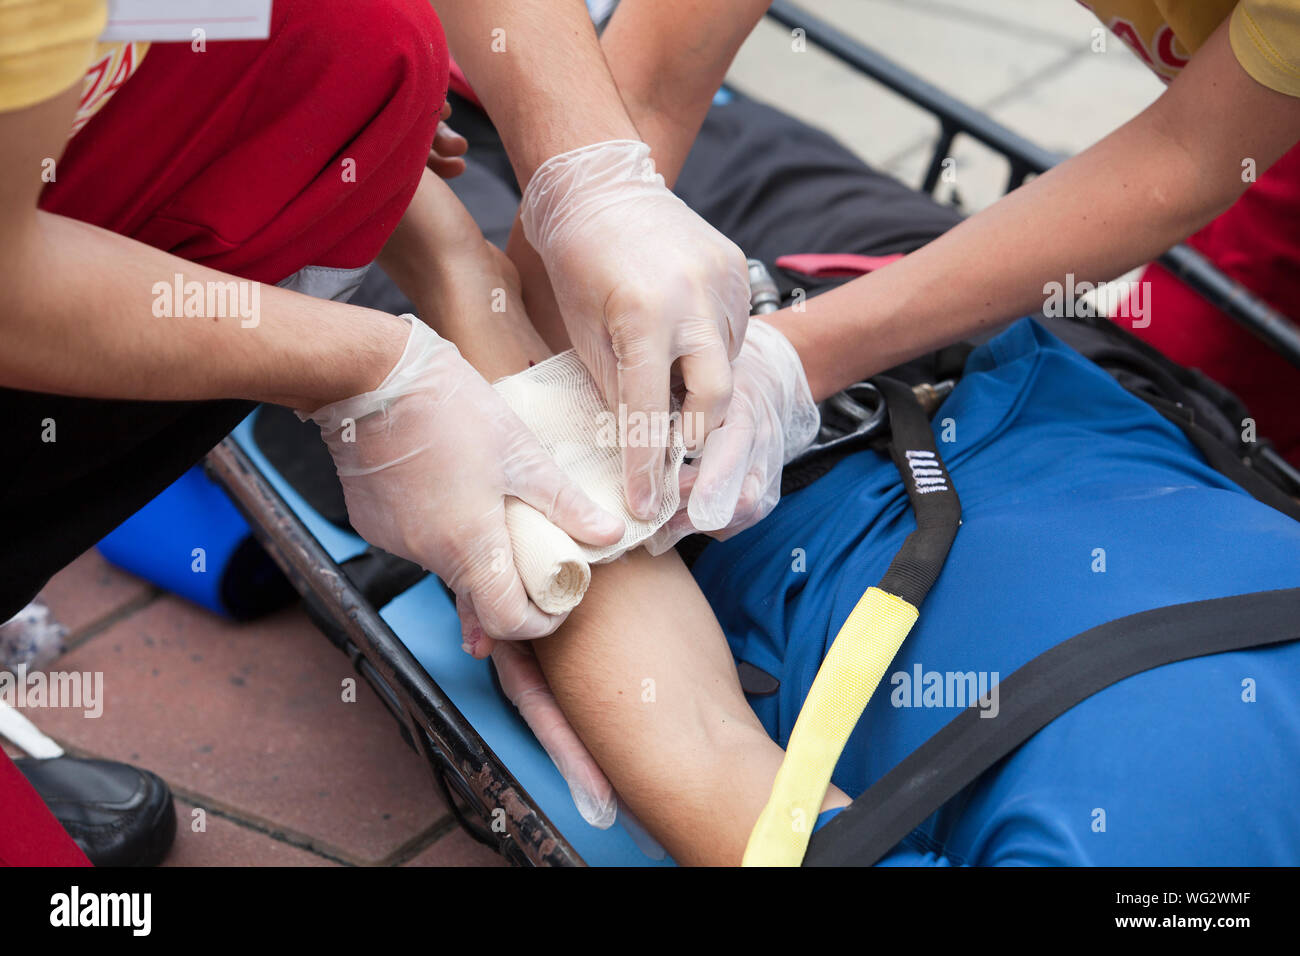 Midsection Of Healthcare Workers Bandaging Patient On Stretcher Stock Photo